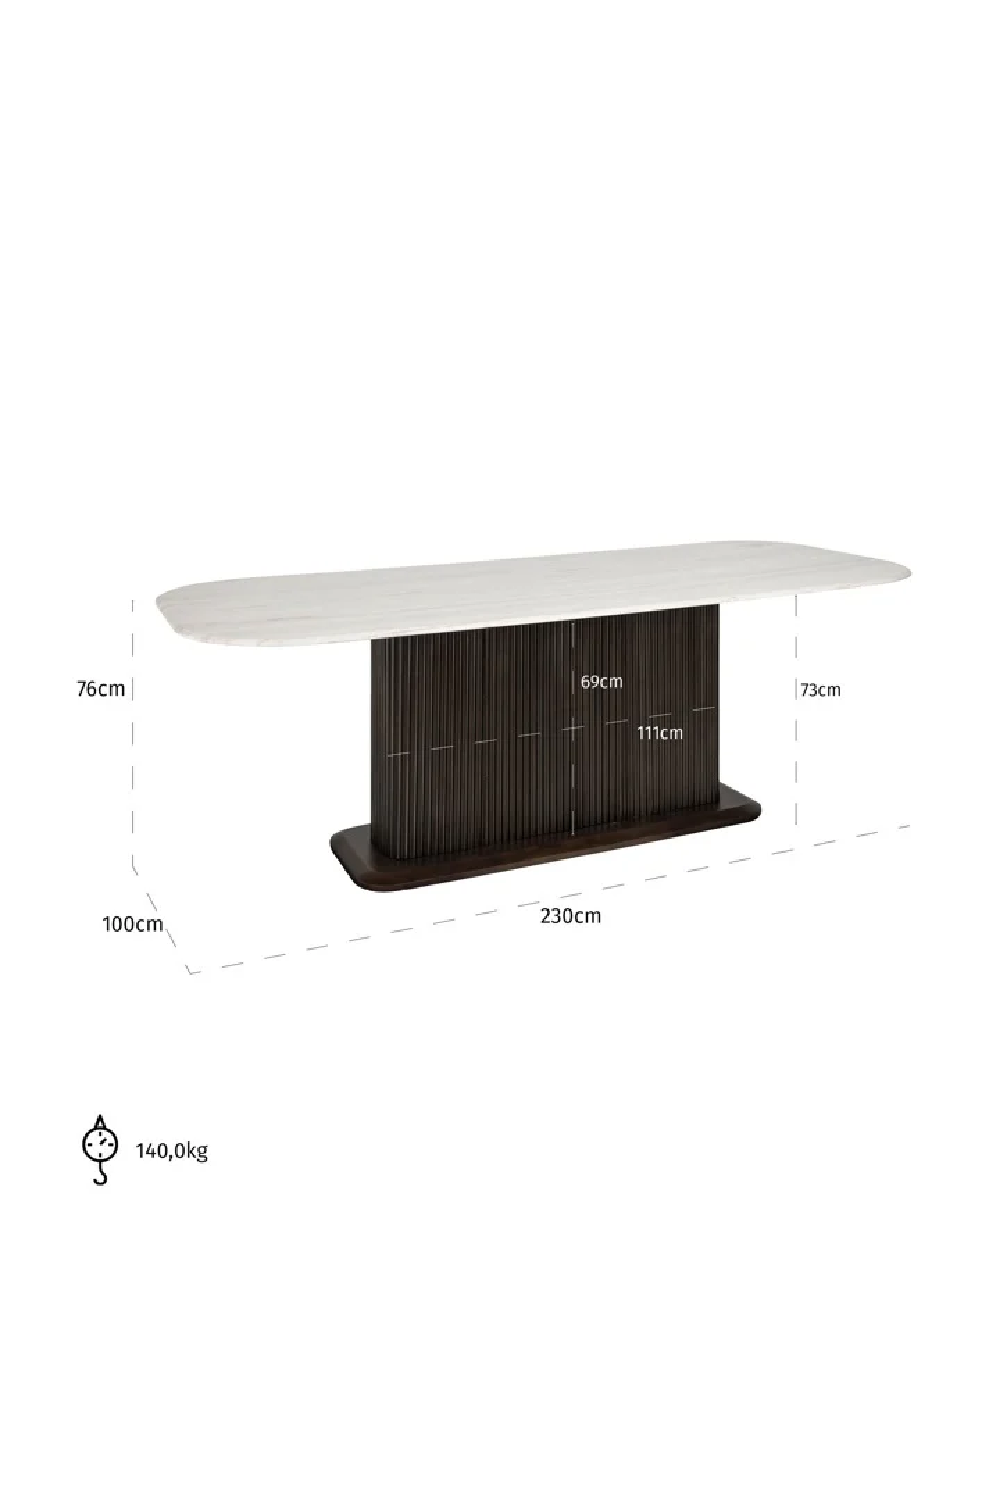 White Marble Rectangular Dining Table | OROA Mayfield | Oroa.com